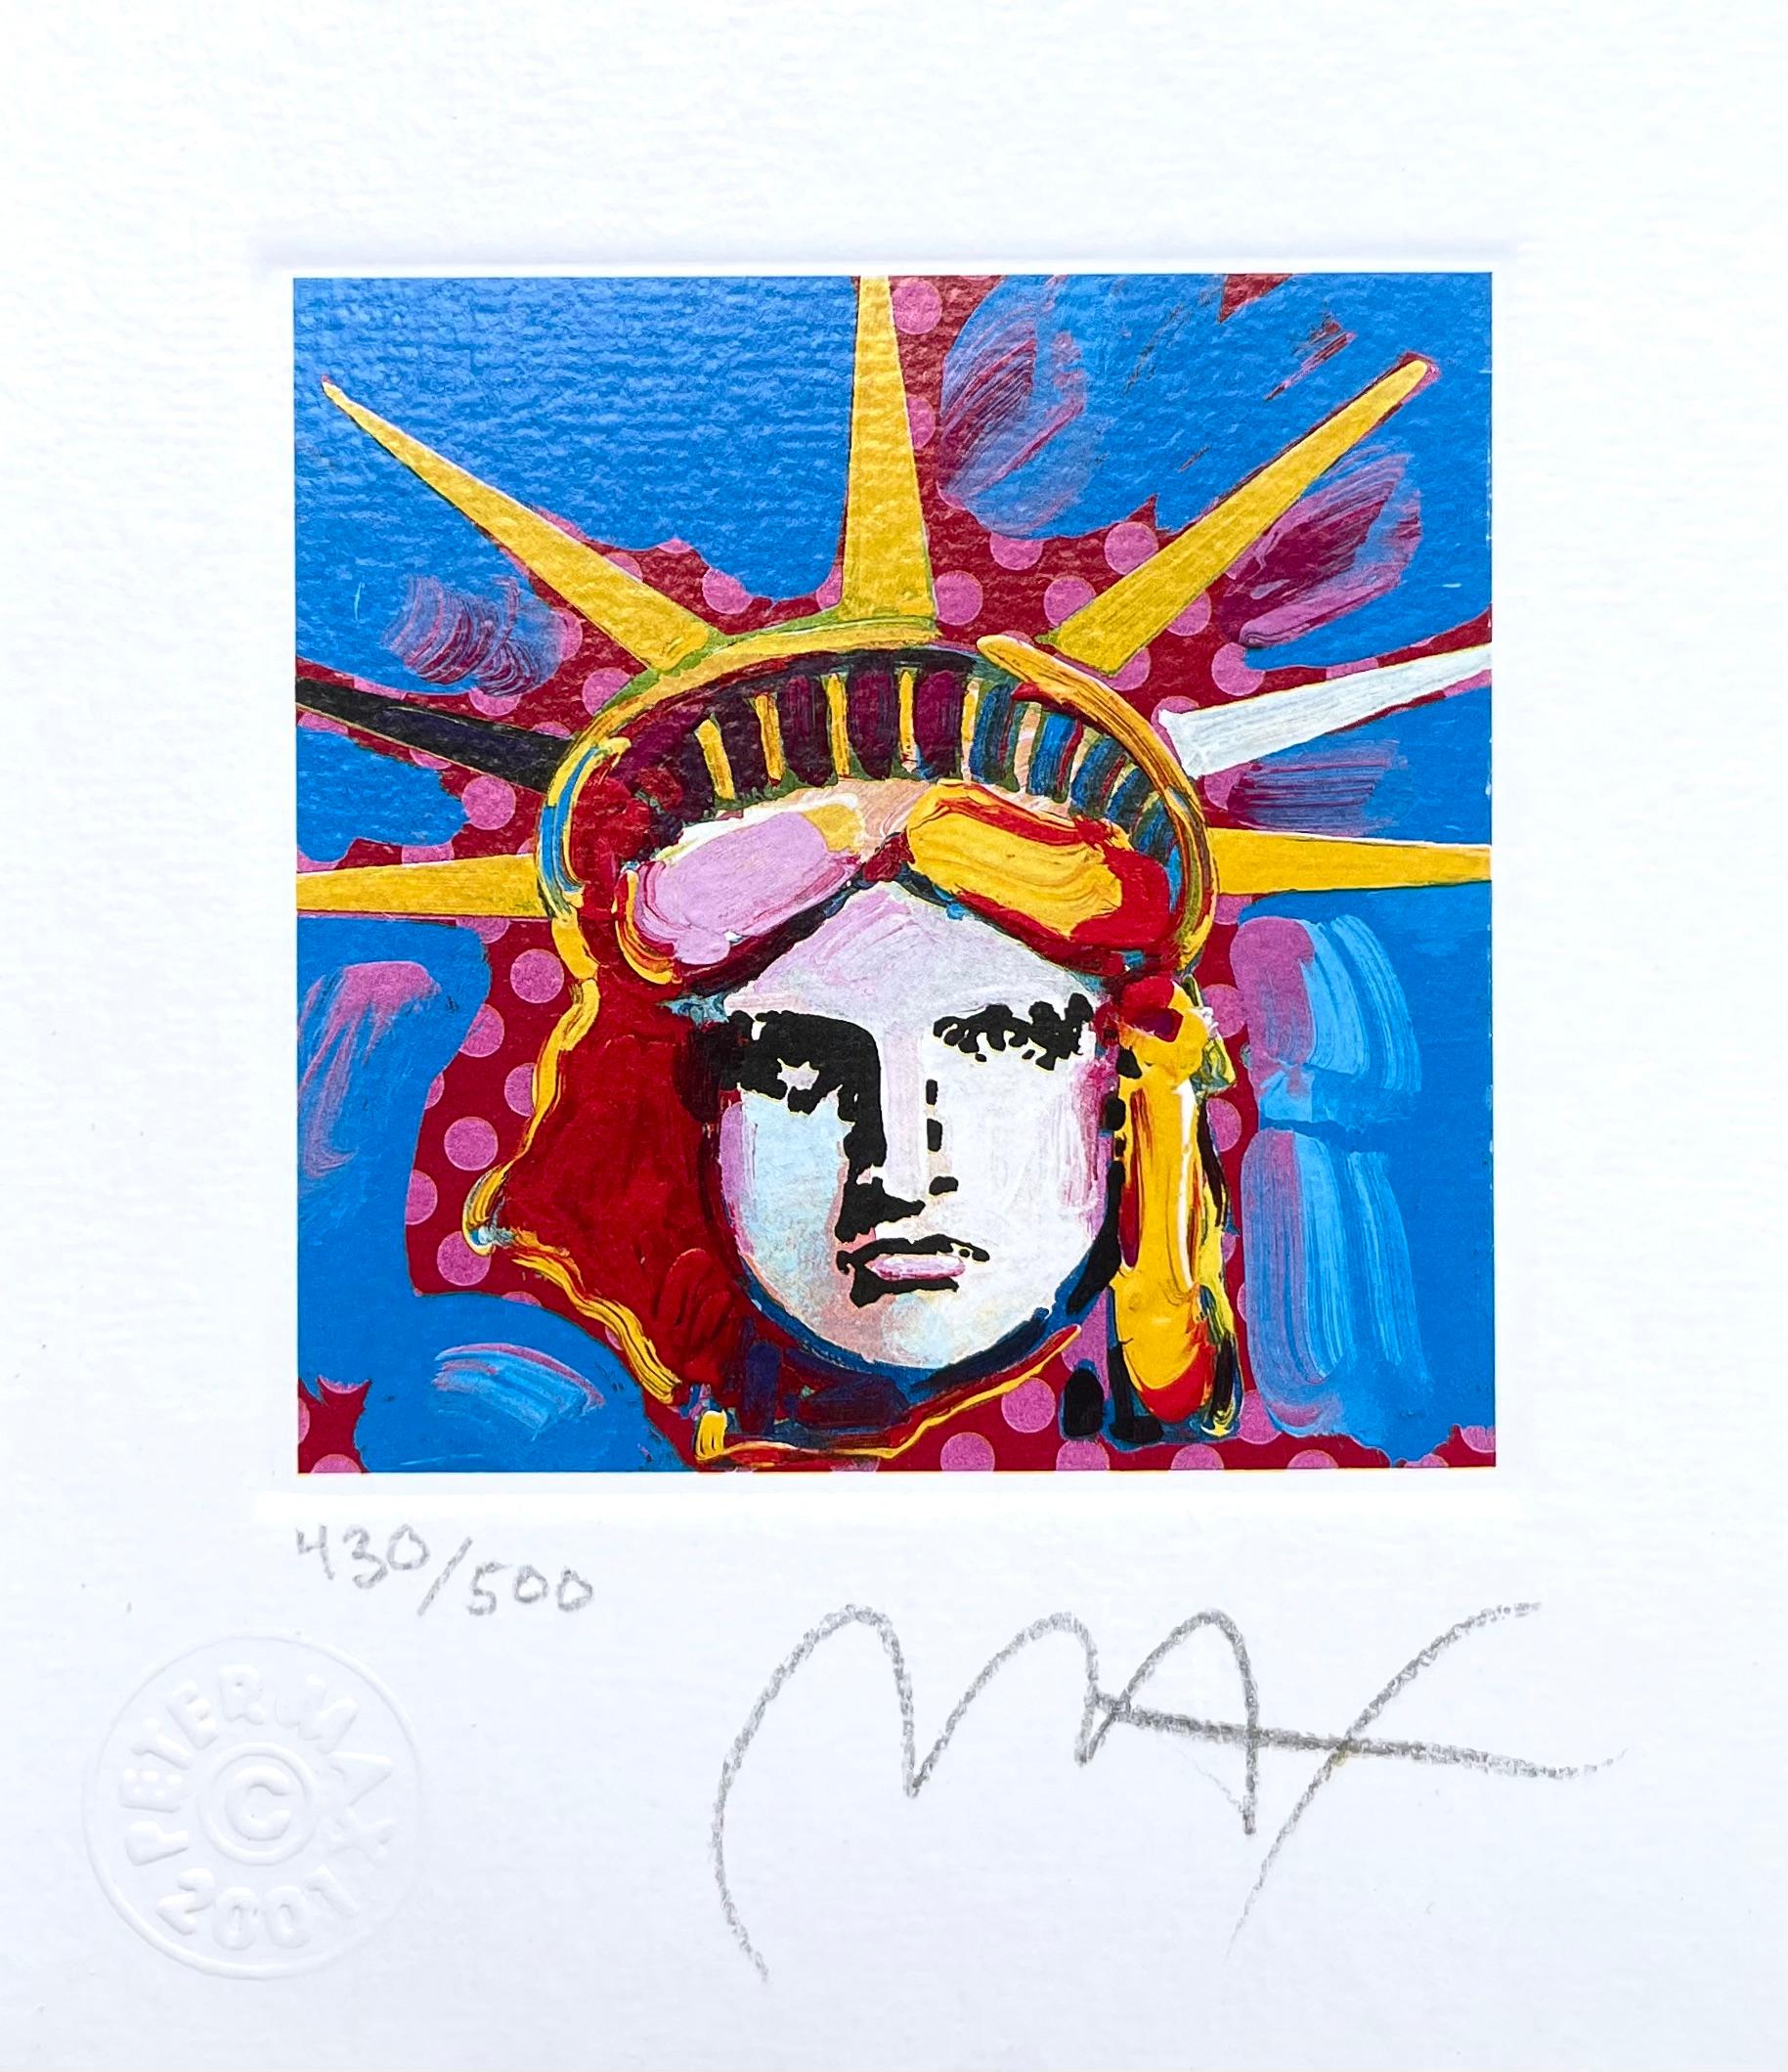 Artist: Peter Max (1937)
Title: Liberty Head I
Year: 2001
Edition: 430/500, plus proofs
Medium: Lithograph on Lustro Saxony paper
Size: 3.43 x 2.62 inches
Condition: Excellent
Inscription: Signed and numbered by the artist.
Notes: Published by Via